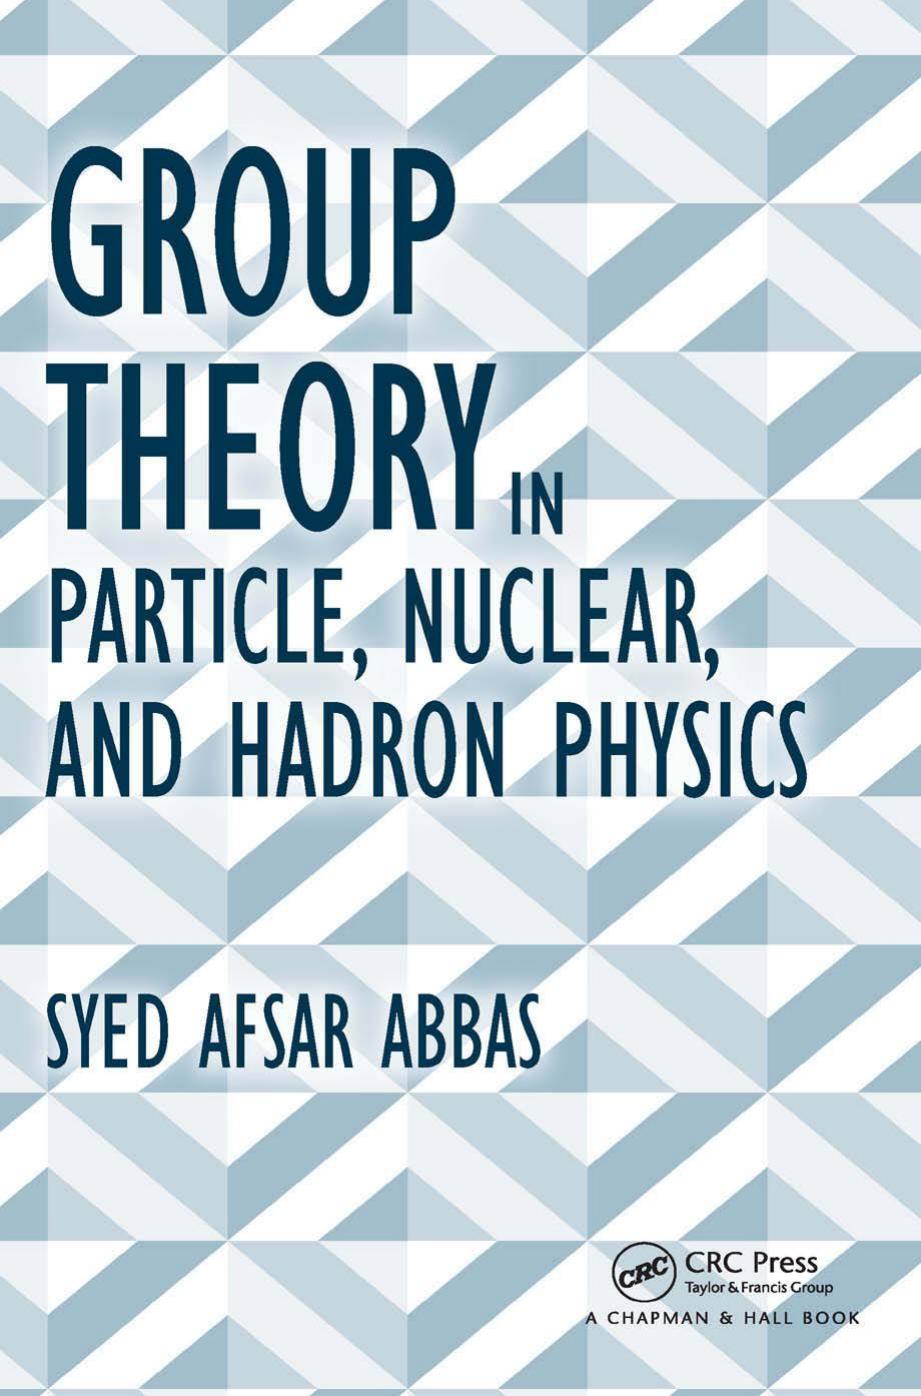 Group theory in particle, nuclear, and hadron physics 2017 ( PDFDrive.com )